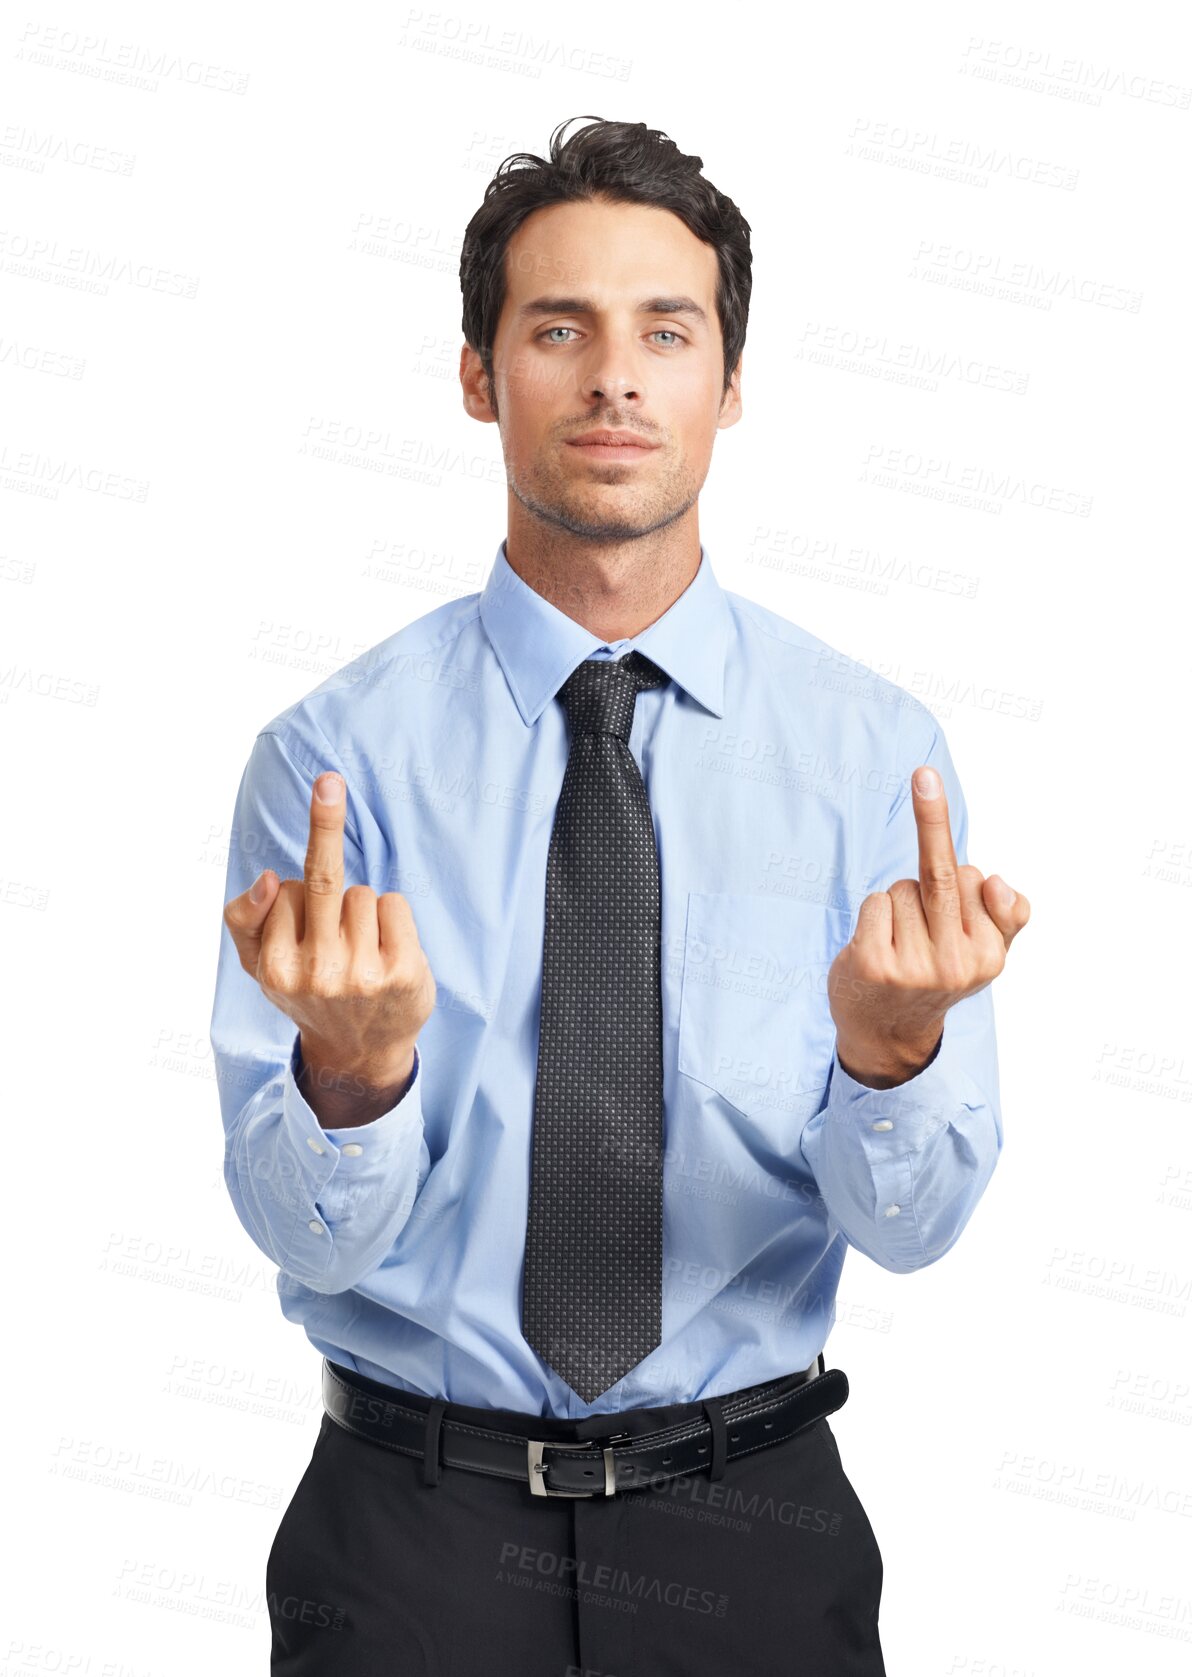 Buy stock photo Business man, middle finger and rude hand gesture, angry with conflict isolated on transparent png background. Sign, emoji and male professional fed up with negative attitude and serious in portrait